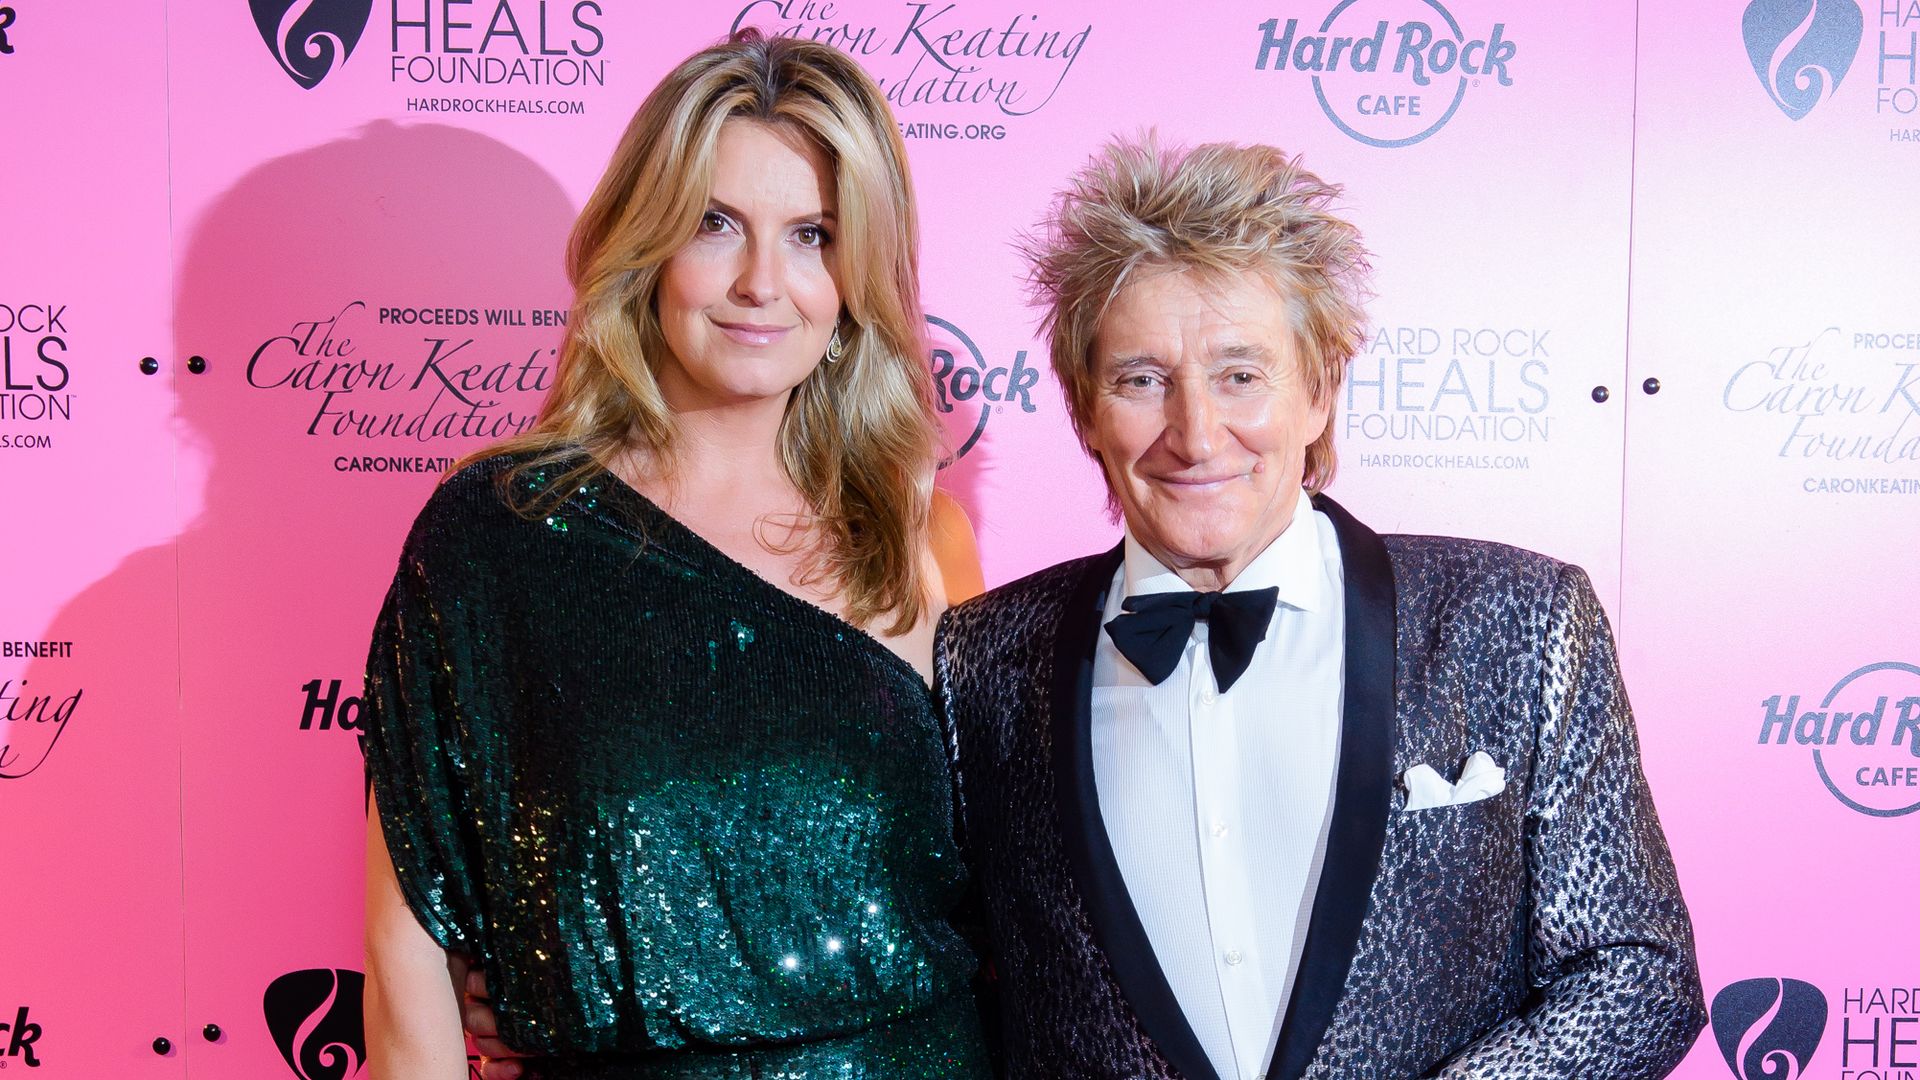 Penny Lancaster in mini dress with Rod Stewart in a suit